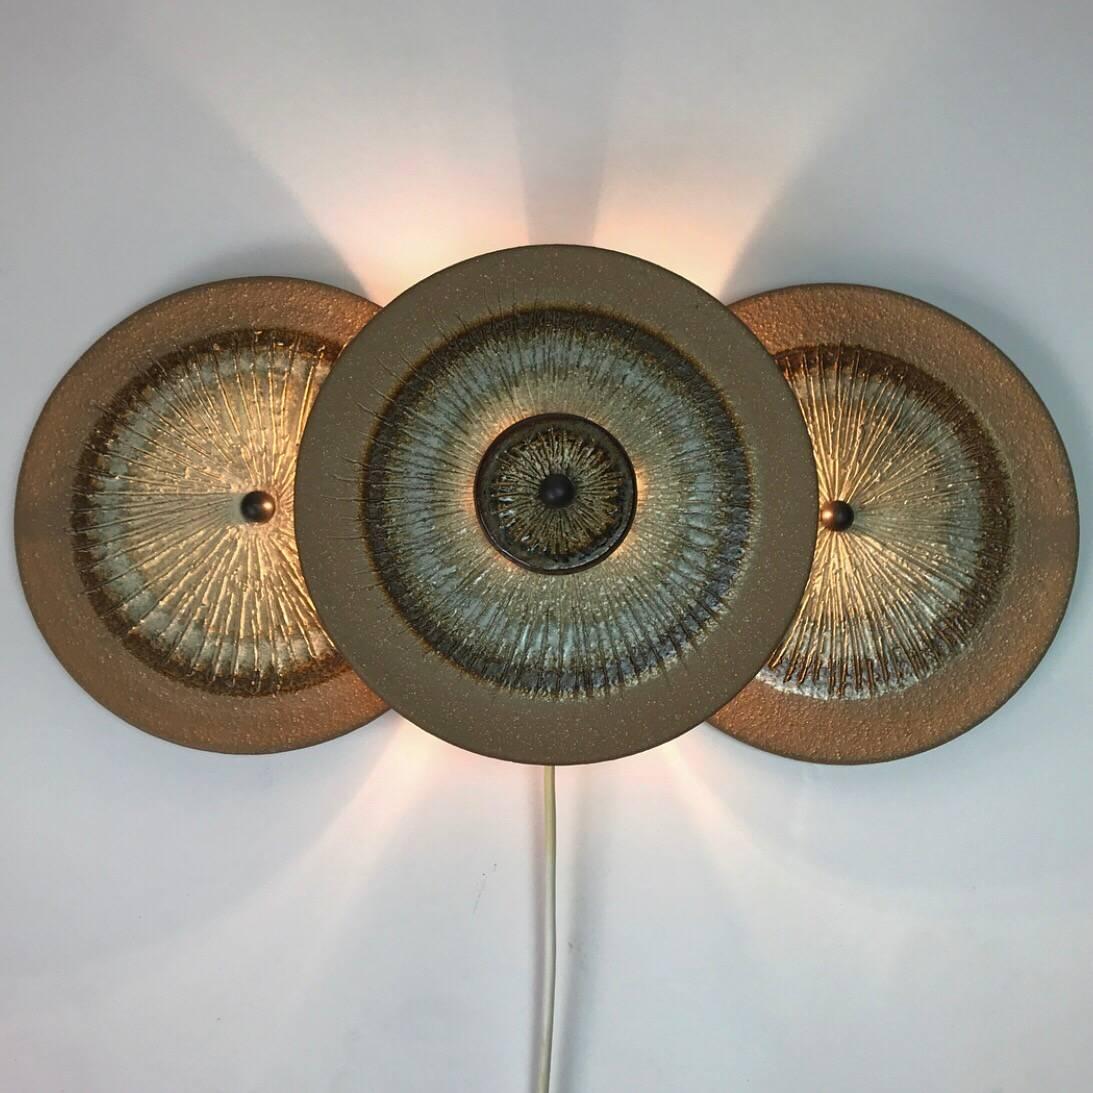 Poul Branborg and Noomi Backhausen Wall Light Sculpture by Soholm, Denmark In Excellent Condition For Sale In Haderslev, DK